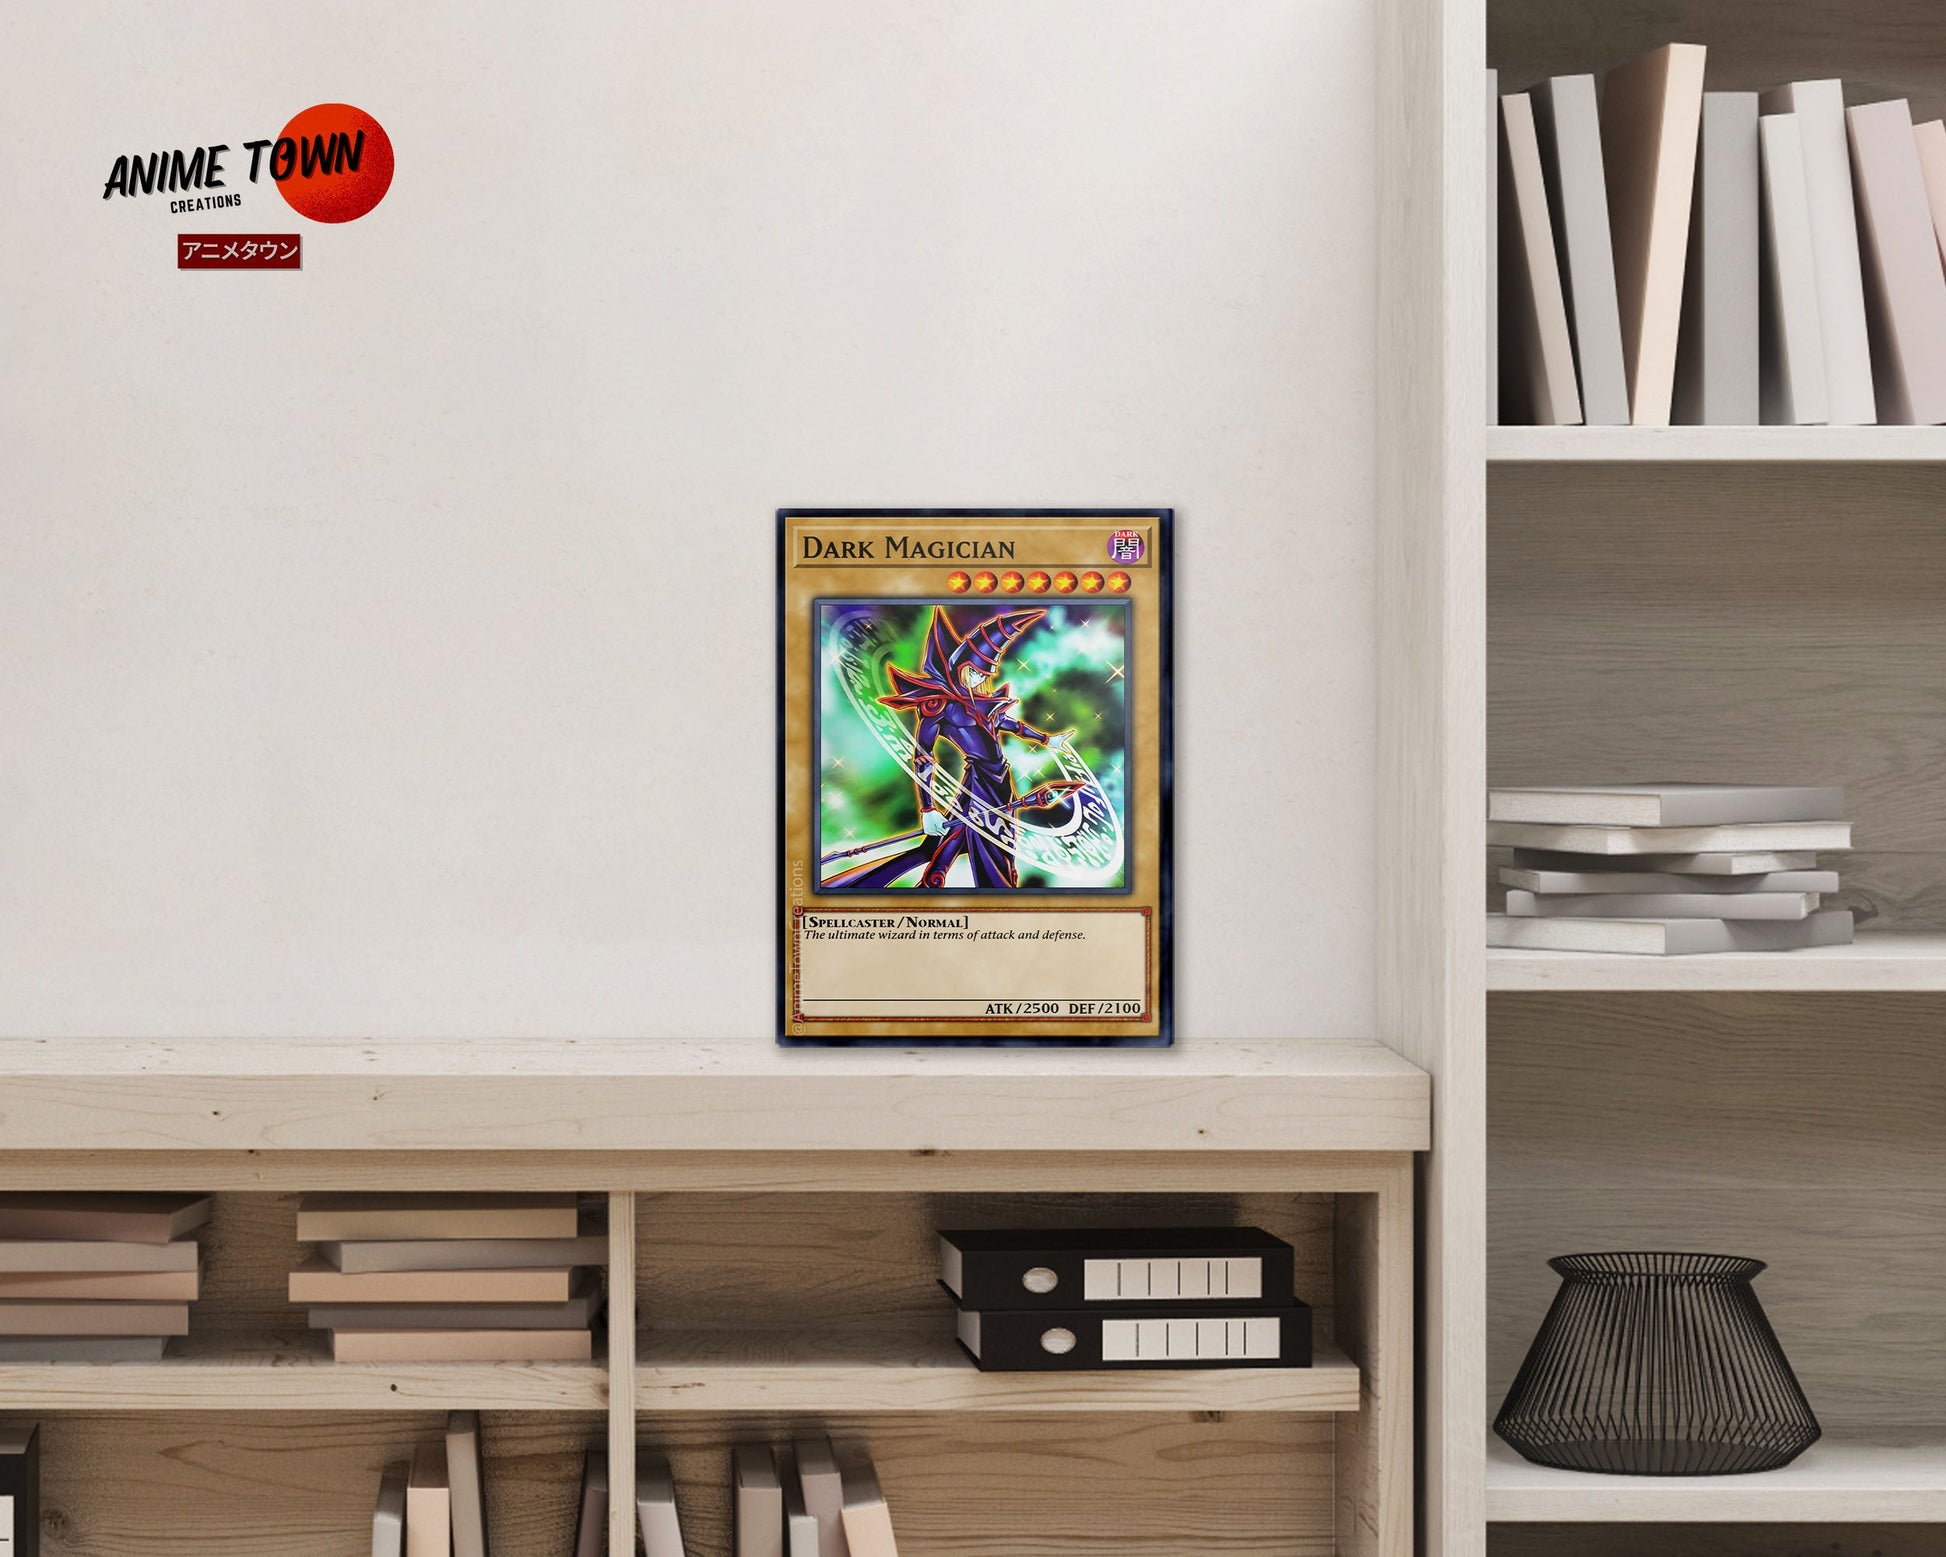 Anime Town Creations Metal Poster Yugioh Dark Magician 1st Edition Card 5" x 7" Home Goods - Anime Yu-Gi-Oh Metal Poster